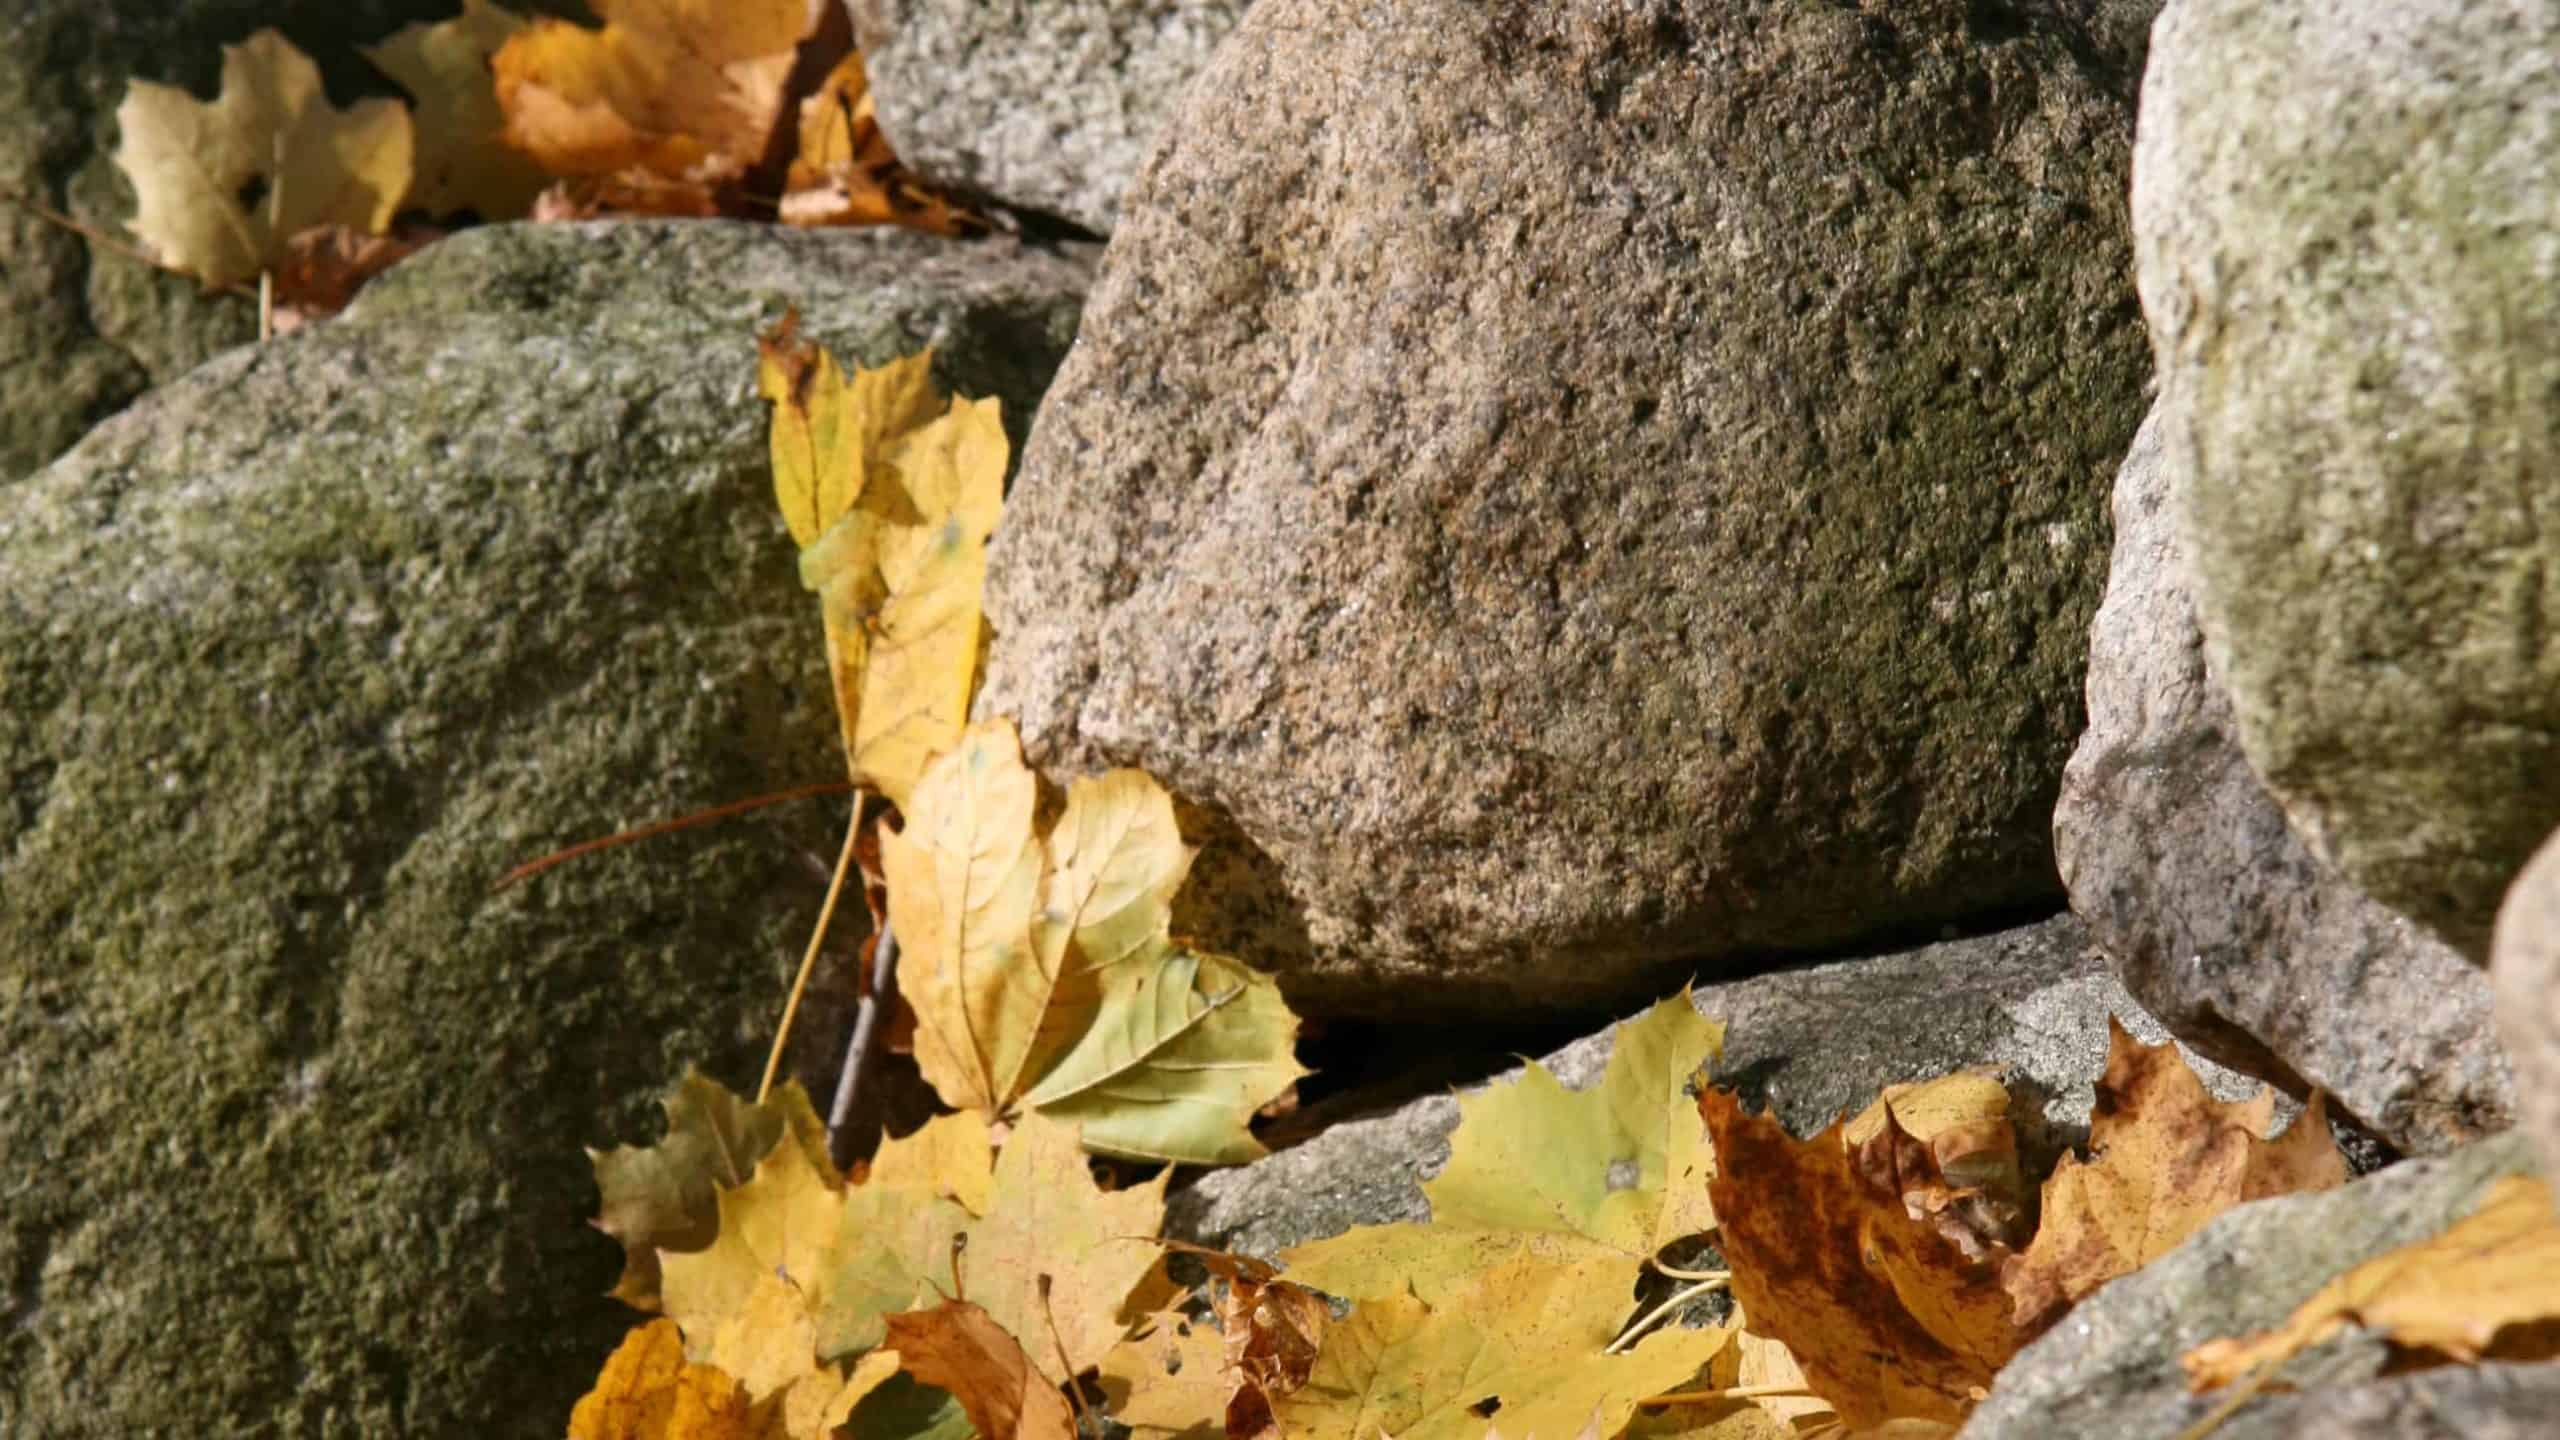 Fallen leaves rest against a stone wall in the autumn.